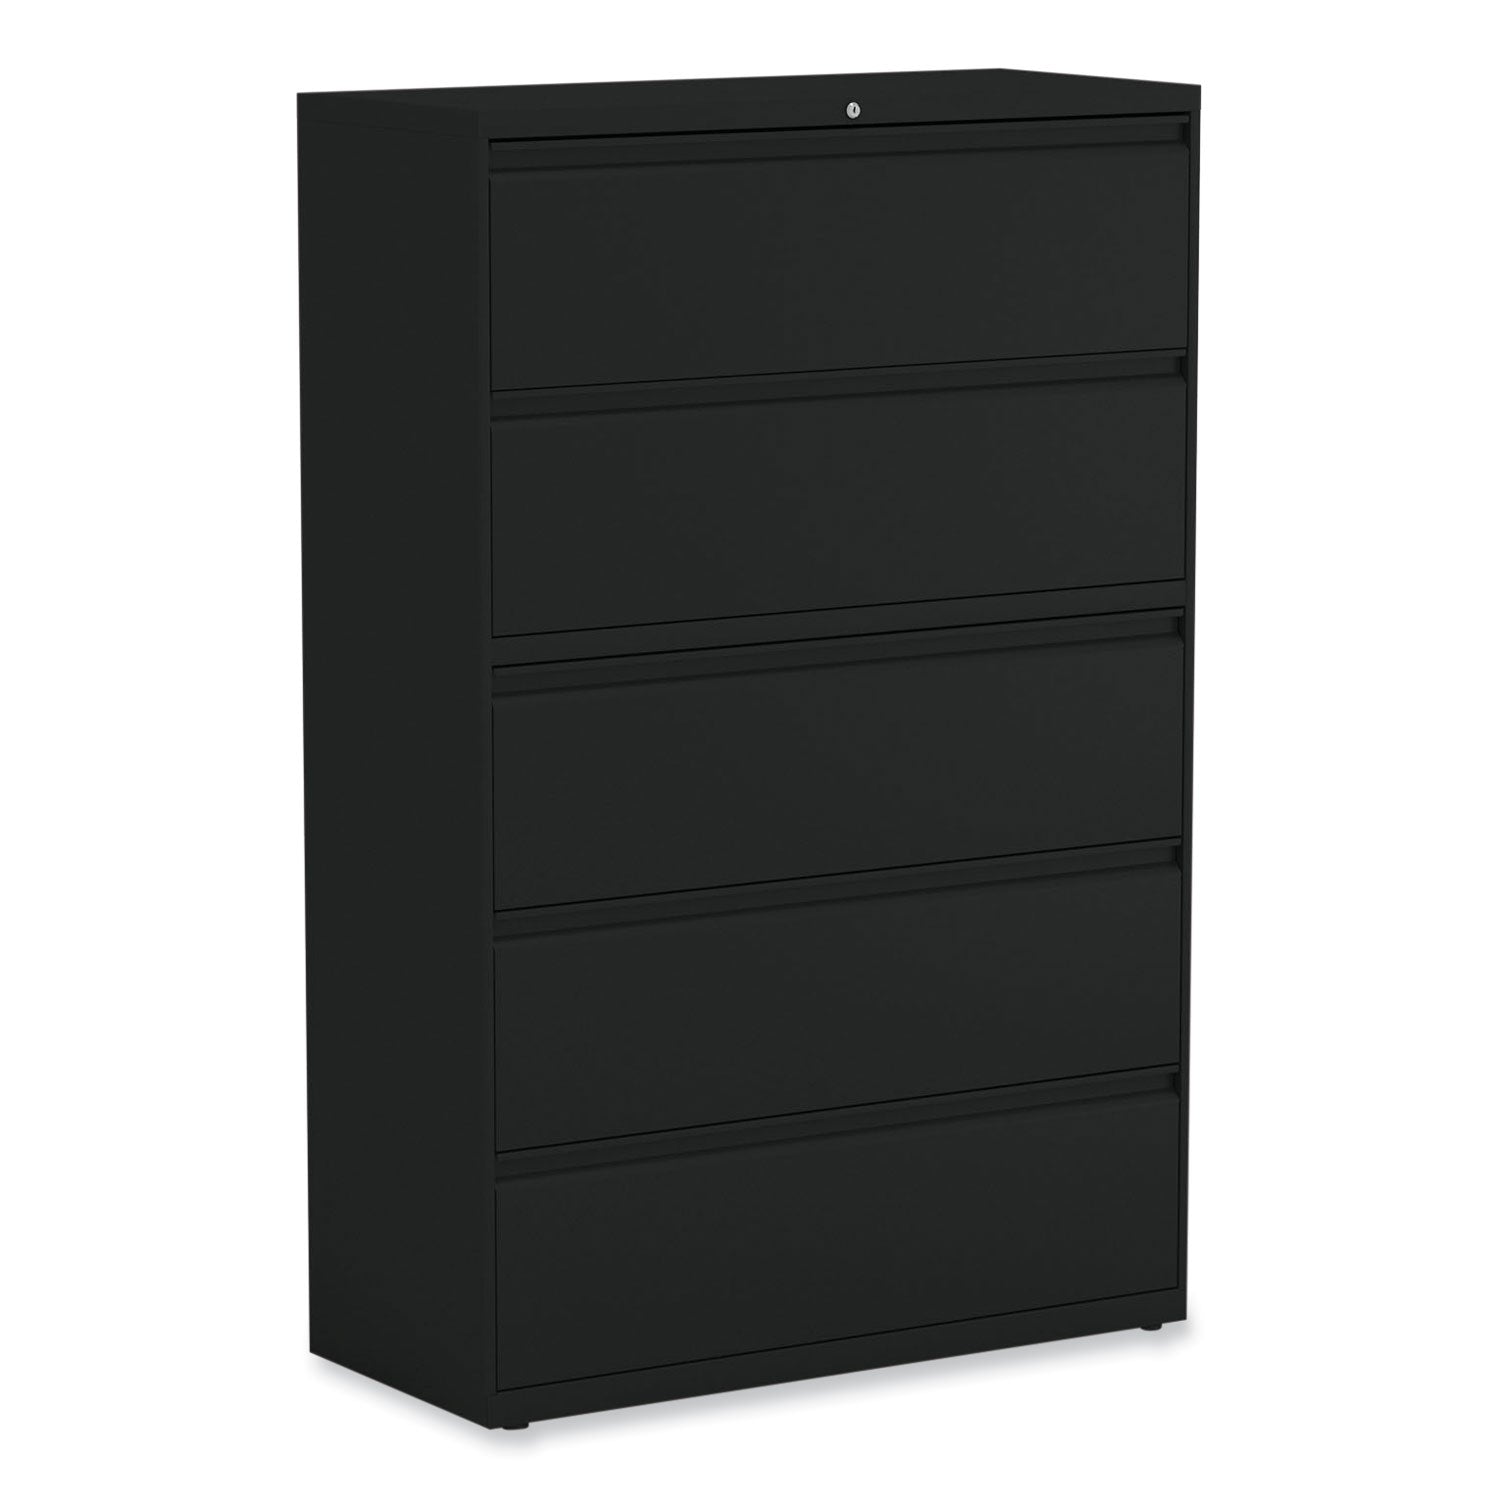 lateral-file-5-legal-letter-a4-a5-size-file-drawers-black-42-x-1863-x-6763_alehlf4267bl - 1